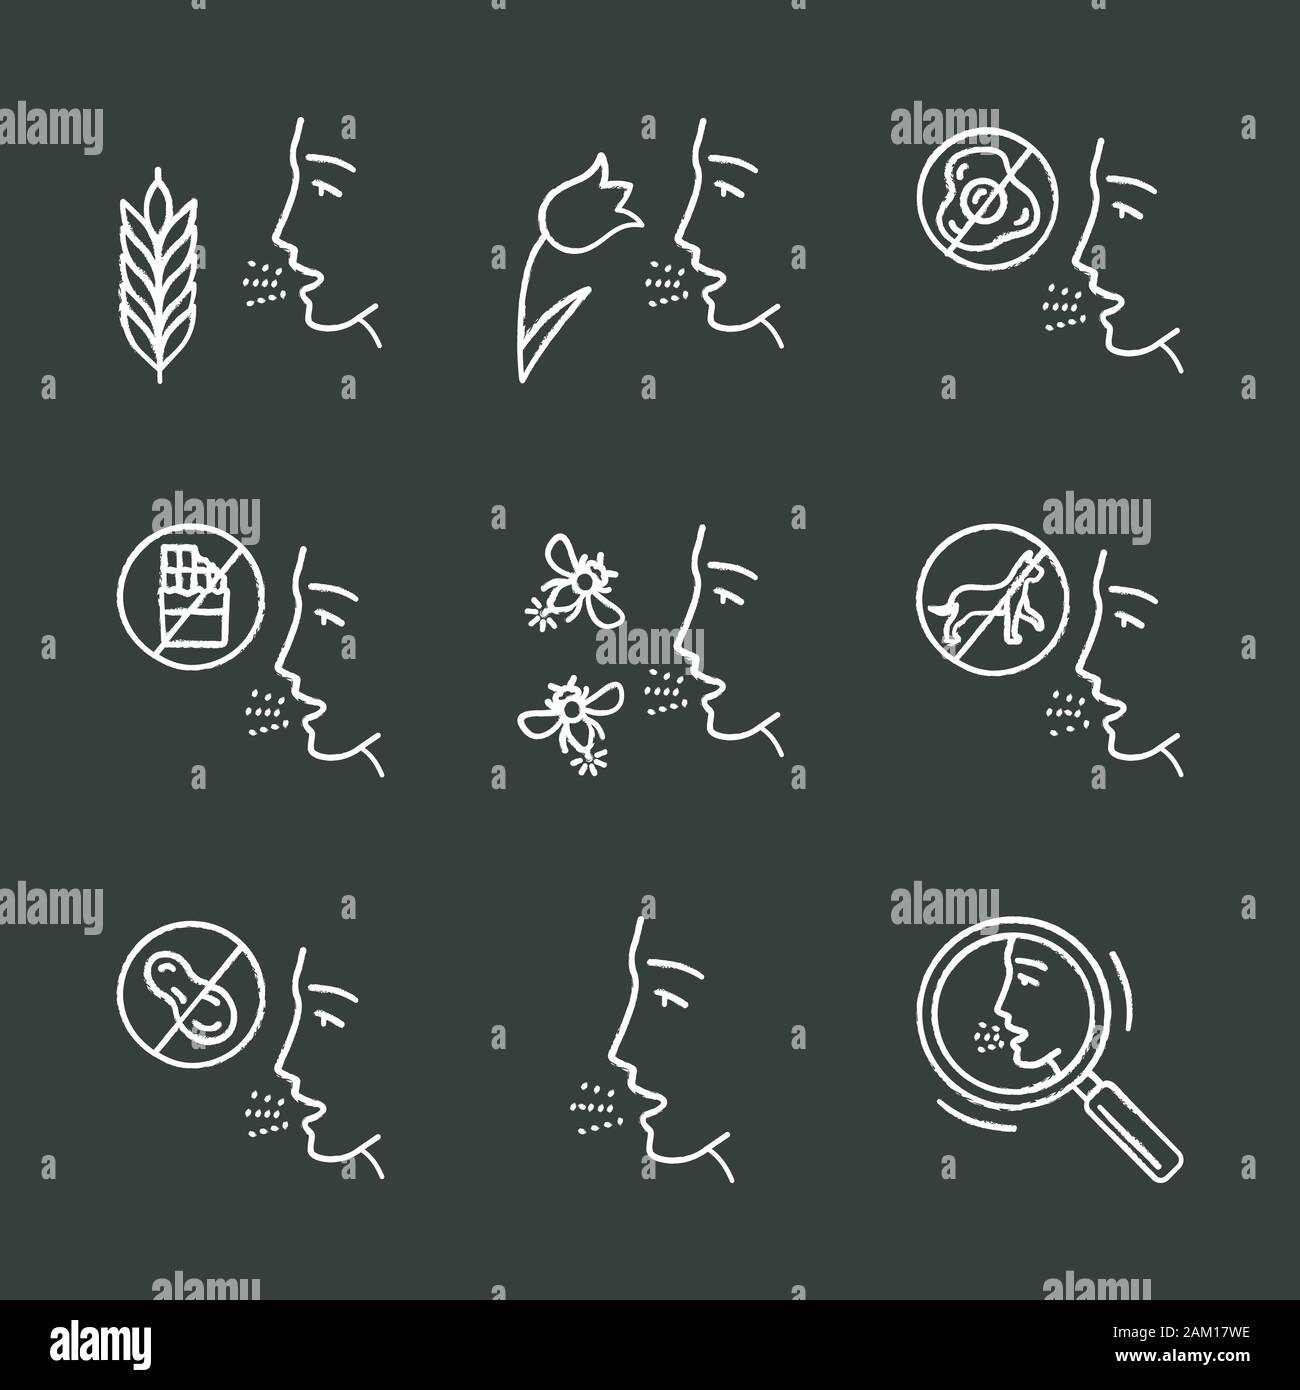 Allergies chalk icons set. Food, animal, insect stings allergy, hay fever, diagnosis. Allergic diseases. Medical health care. Healthcare, medicine. Is Stock Vector